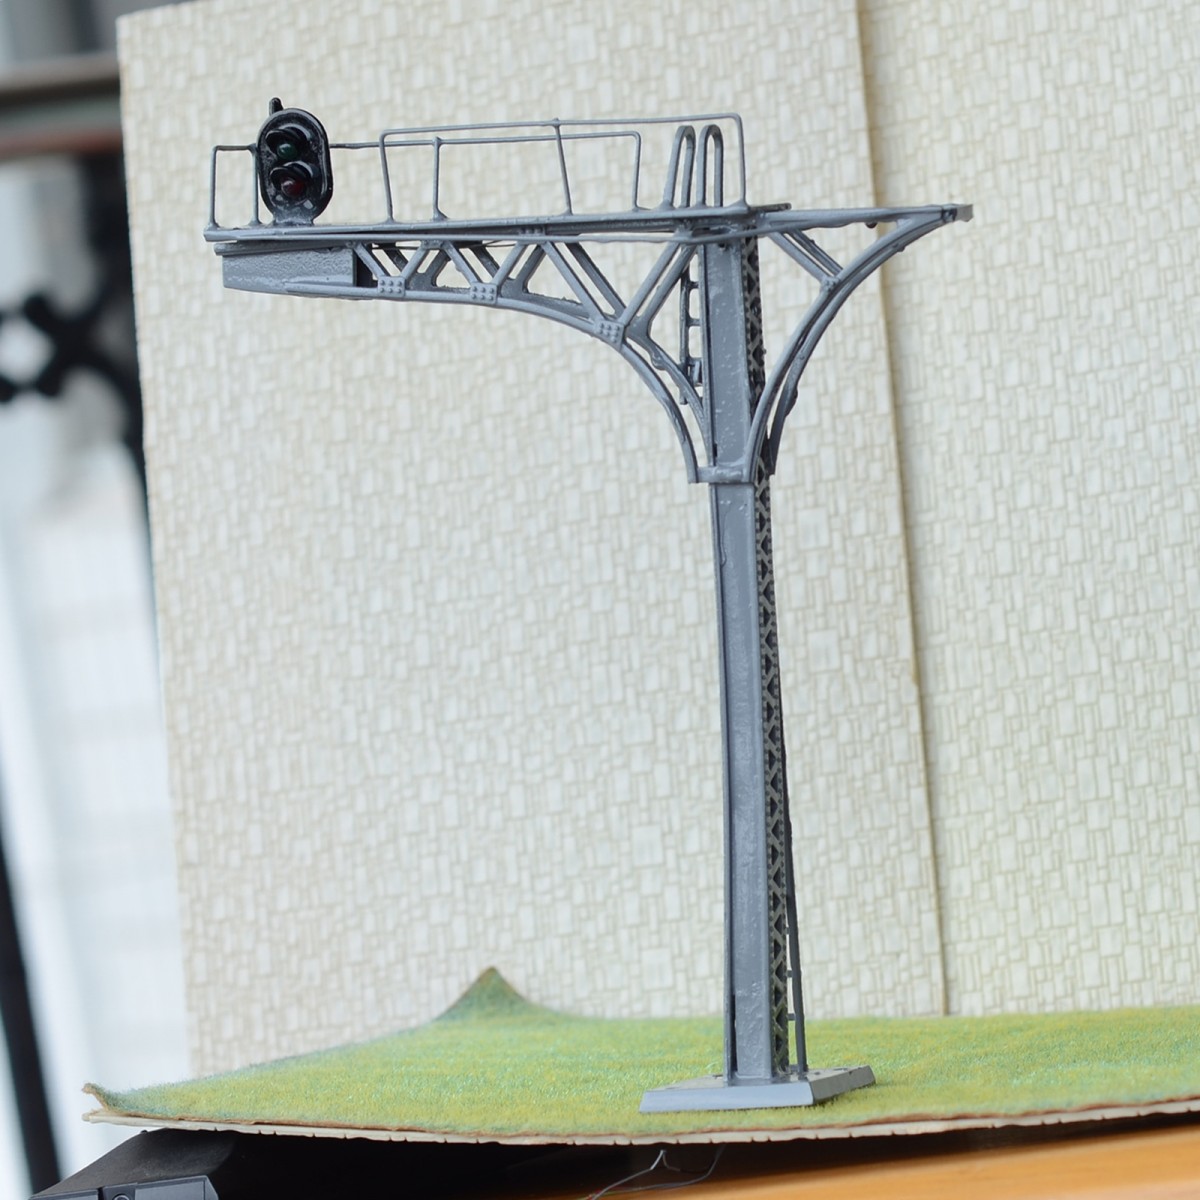 1 x O scale cantilever signal bridge gray LEDs 2 aspects single Track right （WeHonest）（WeHonest）